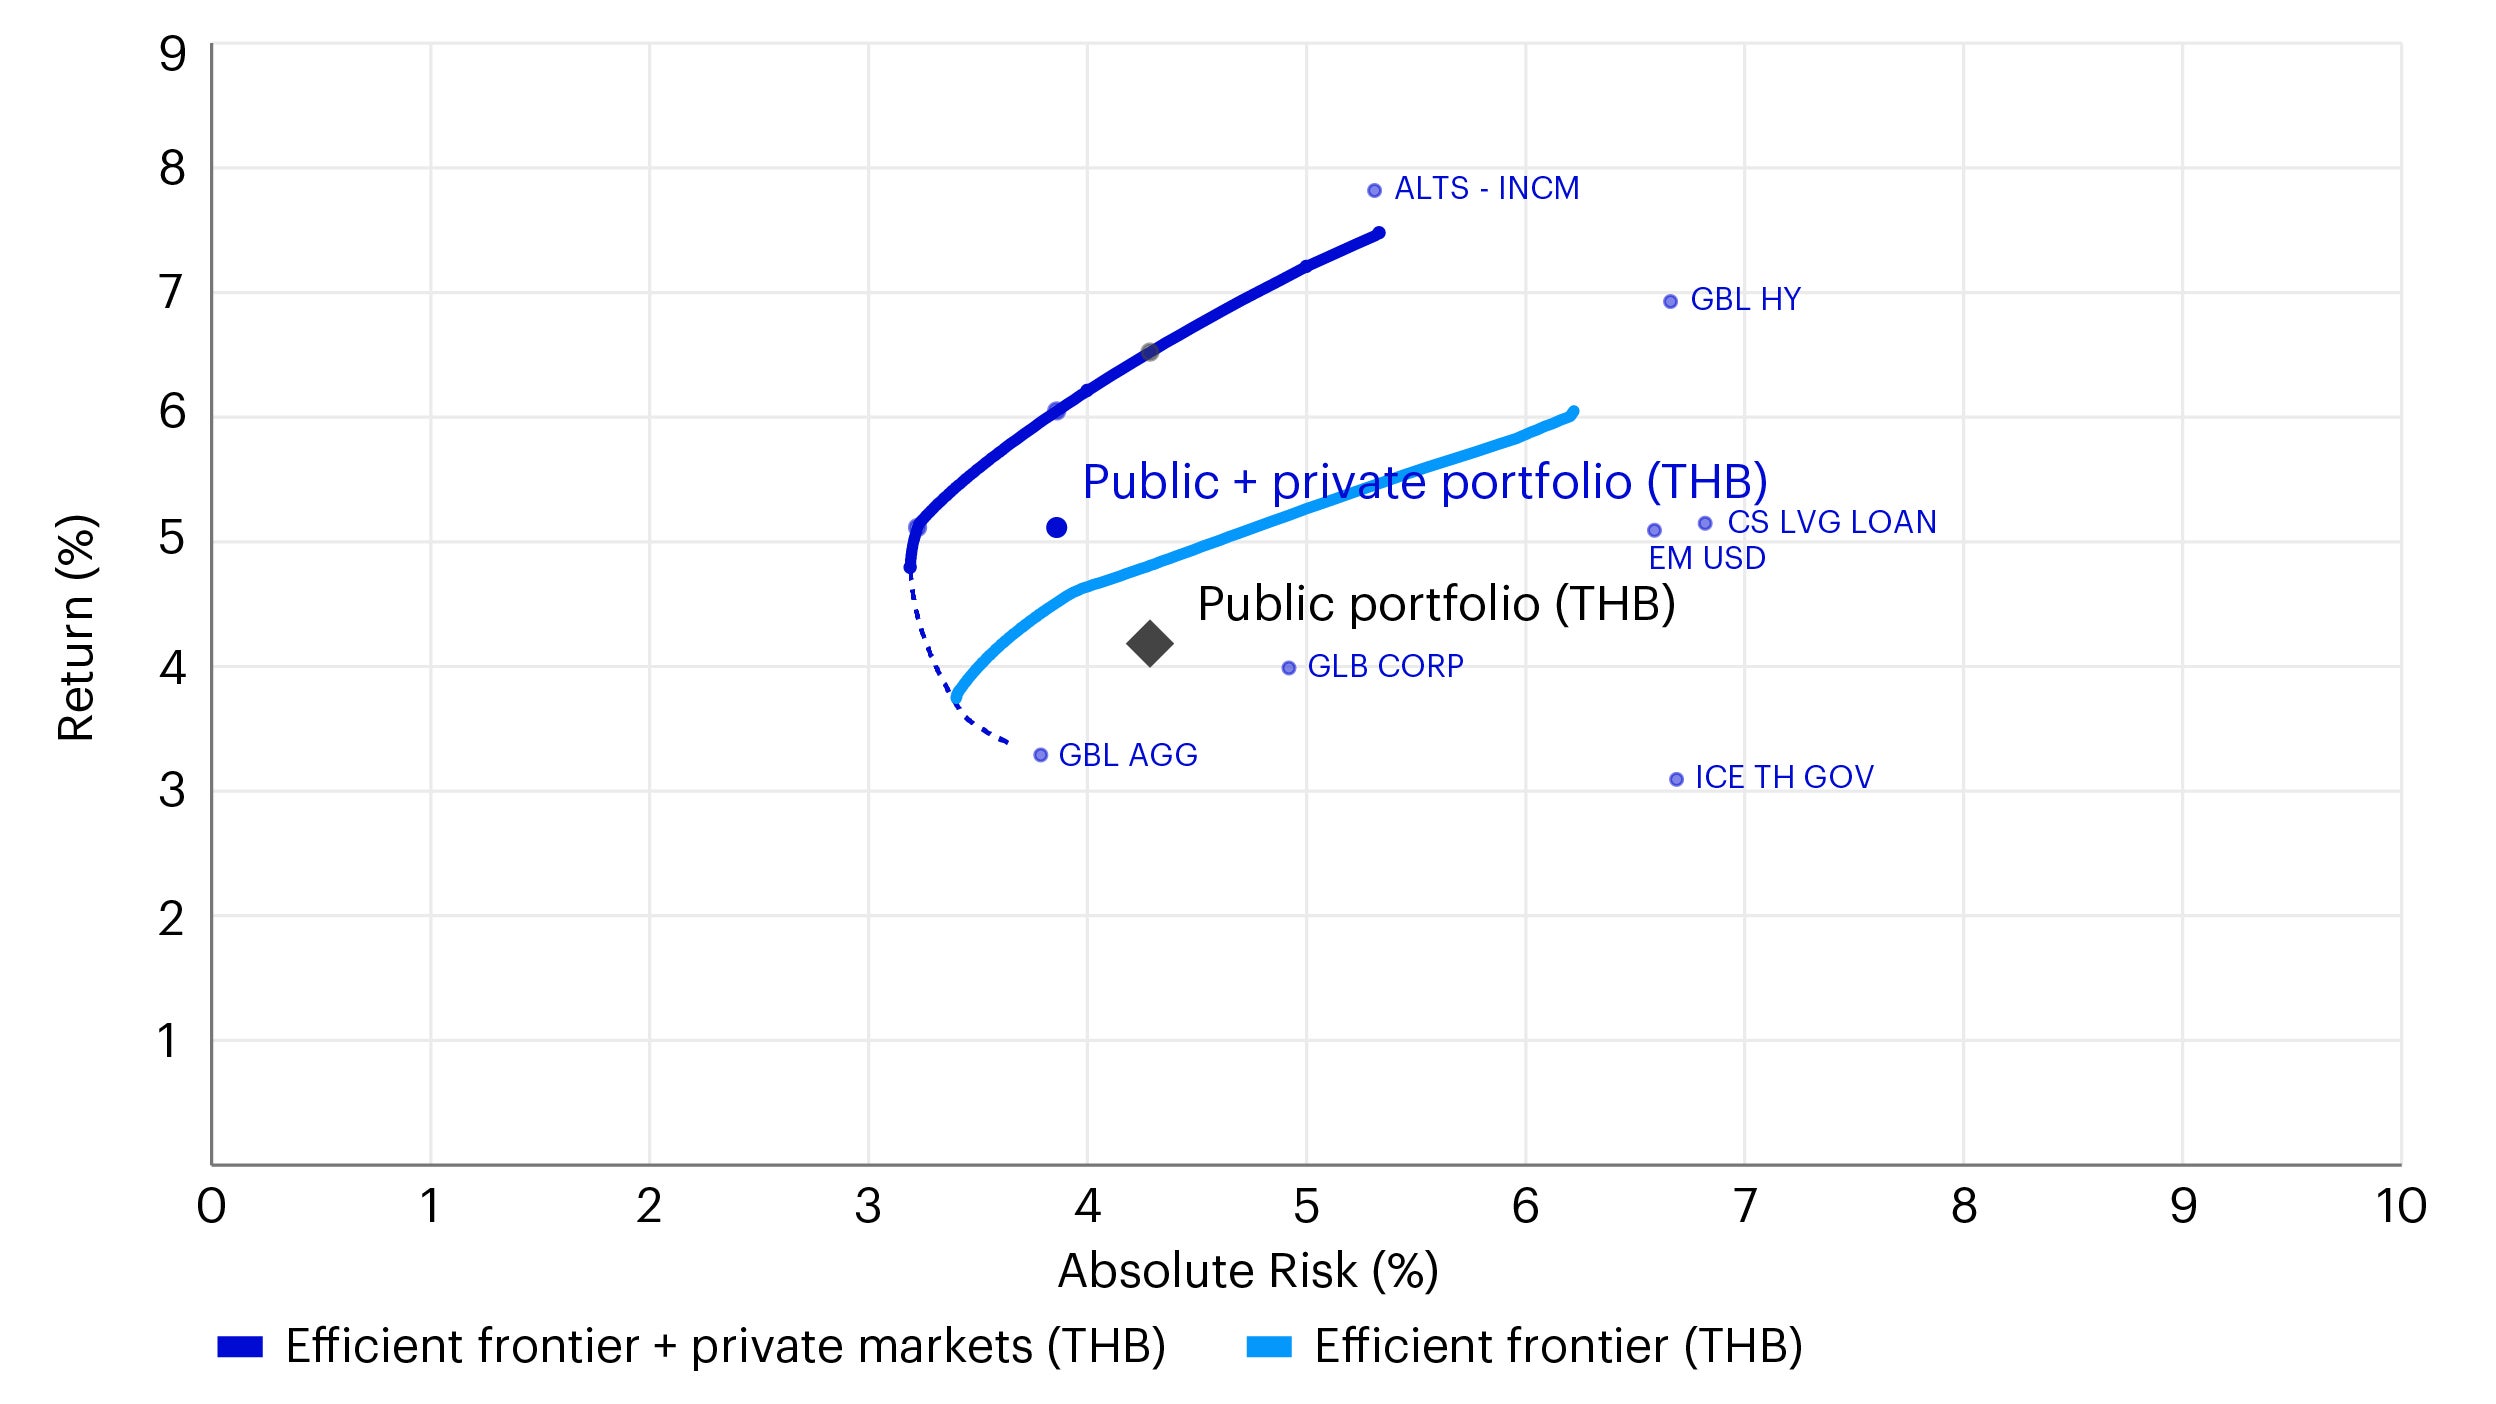 Figure 3 - Efficient frontier with private markets (THB)